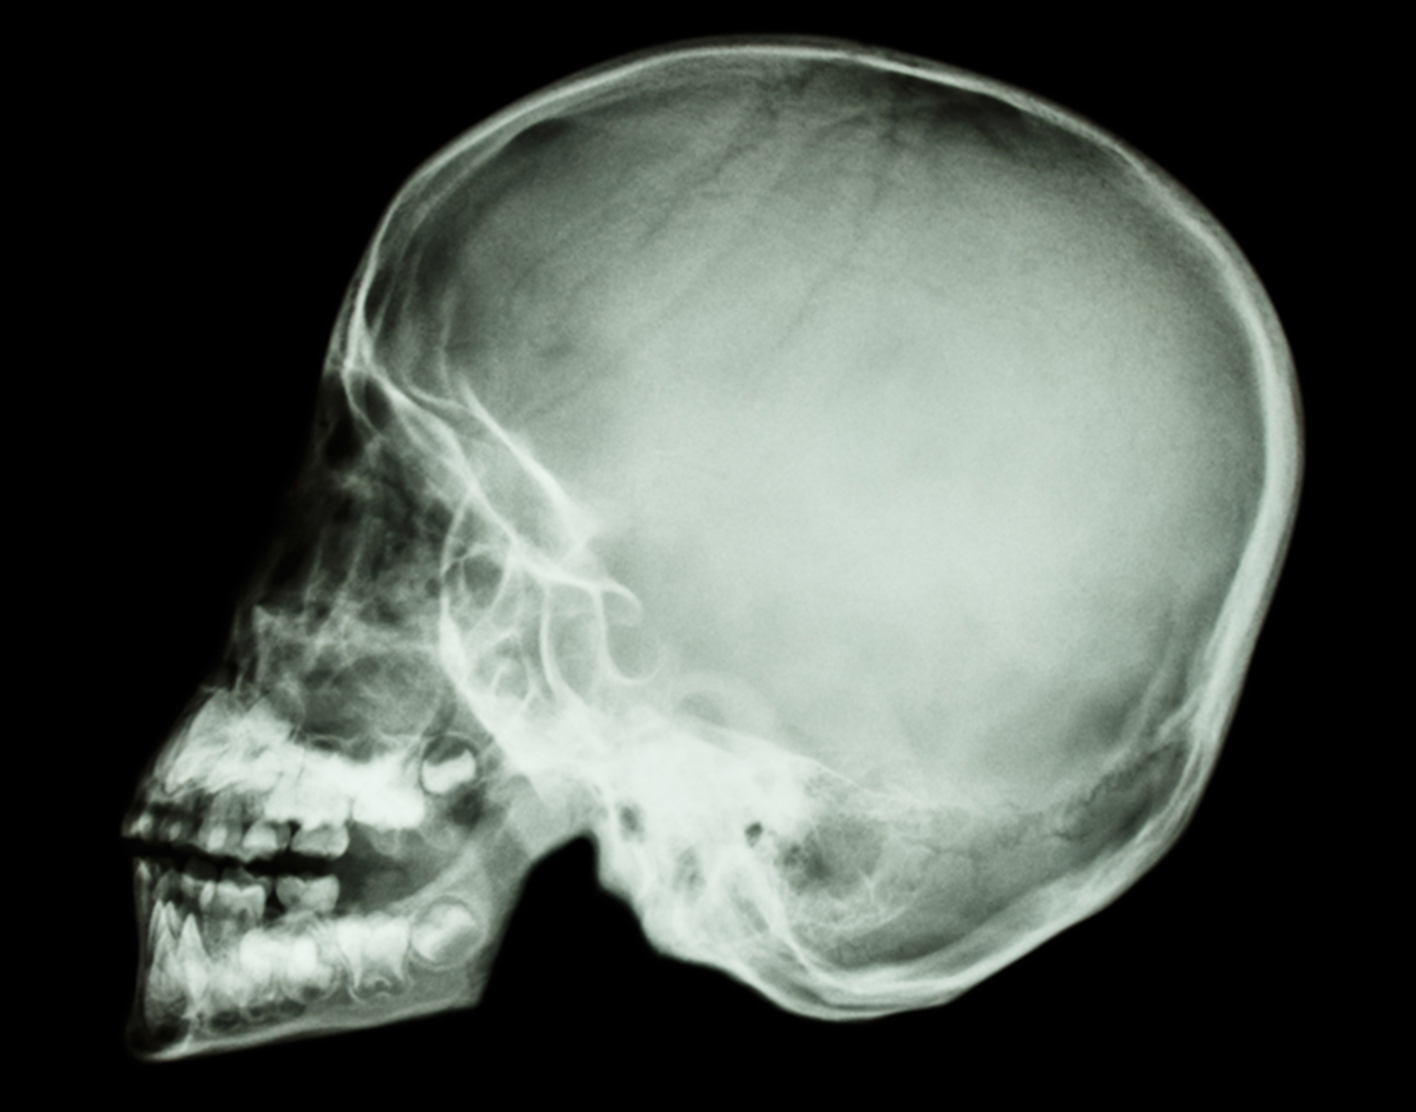 fractured skull x ray